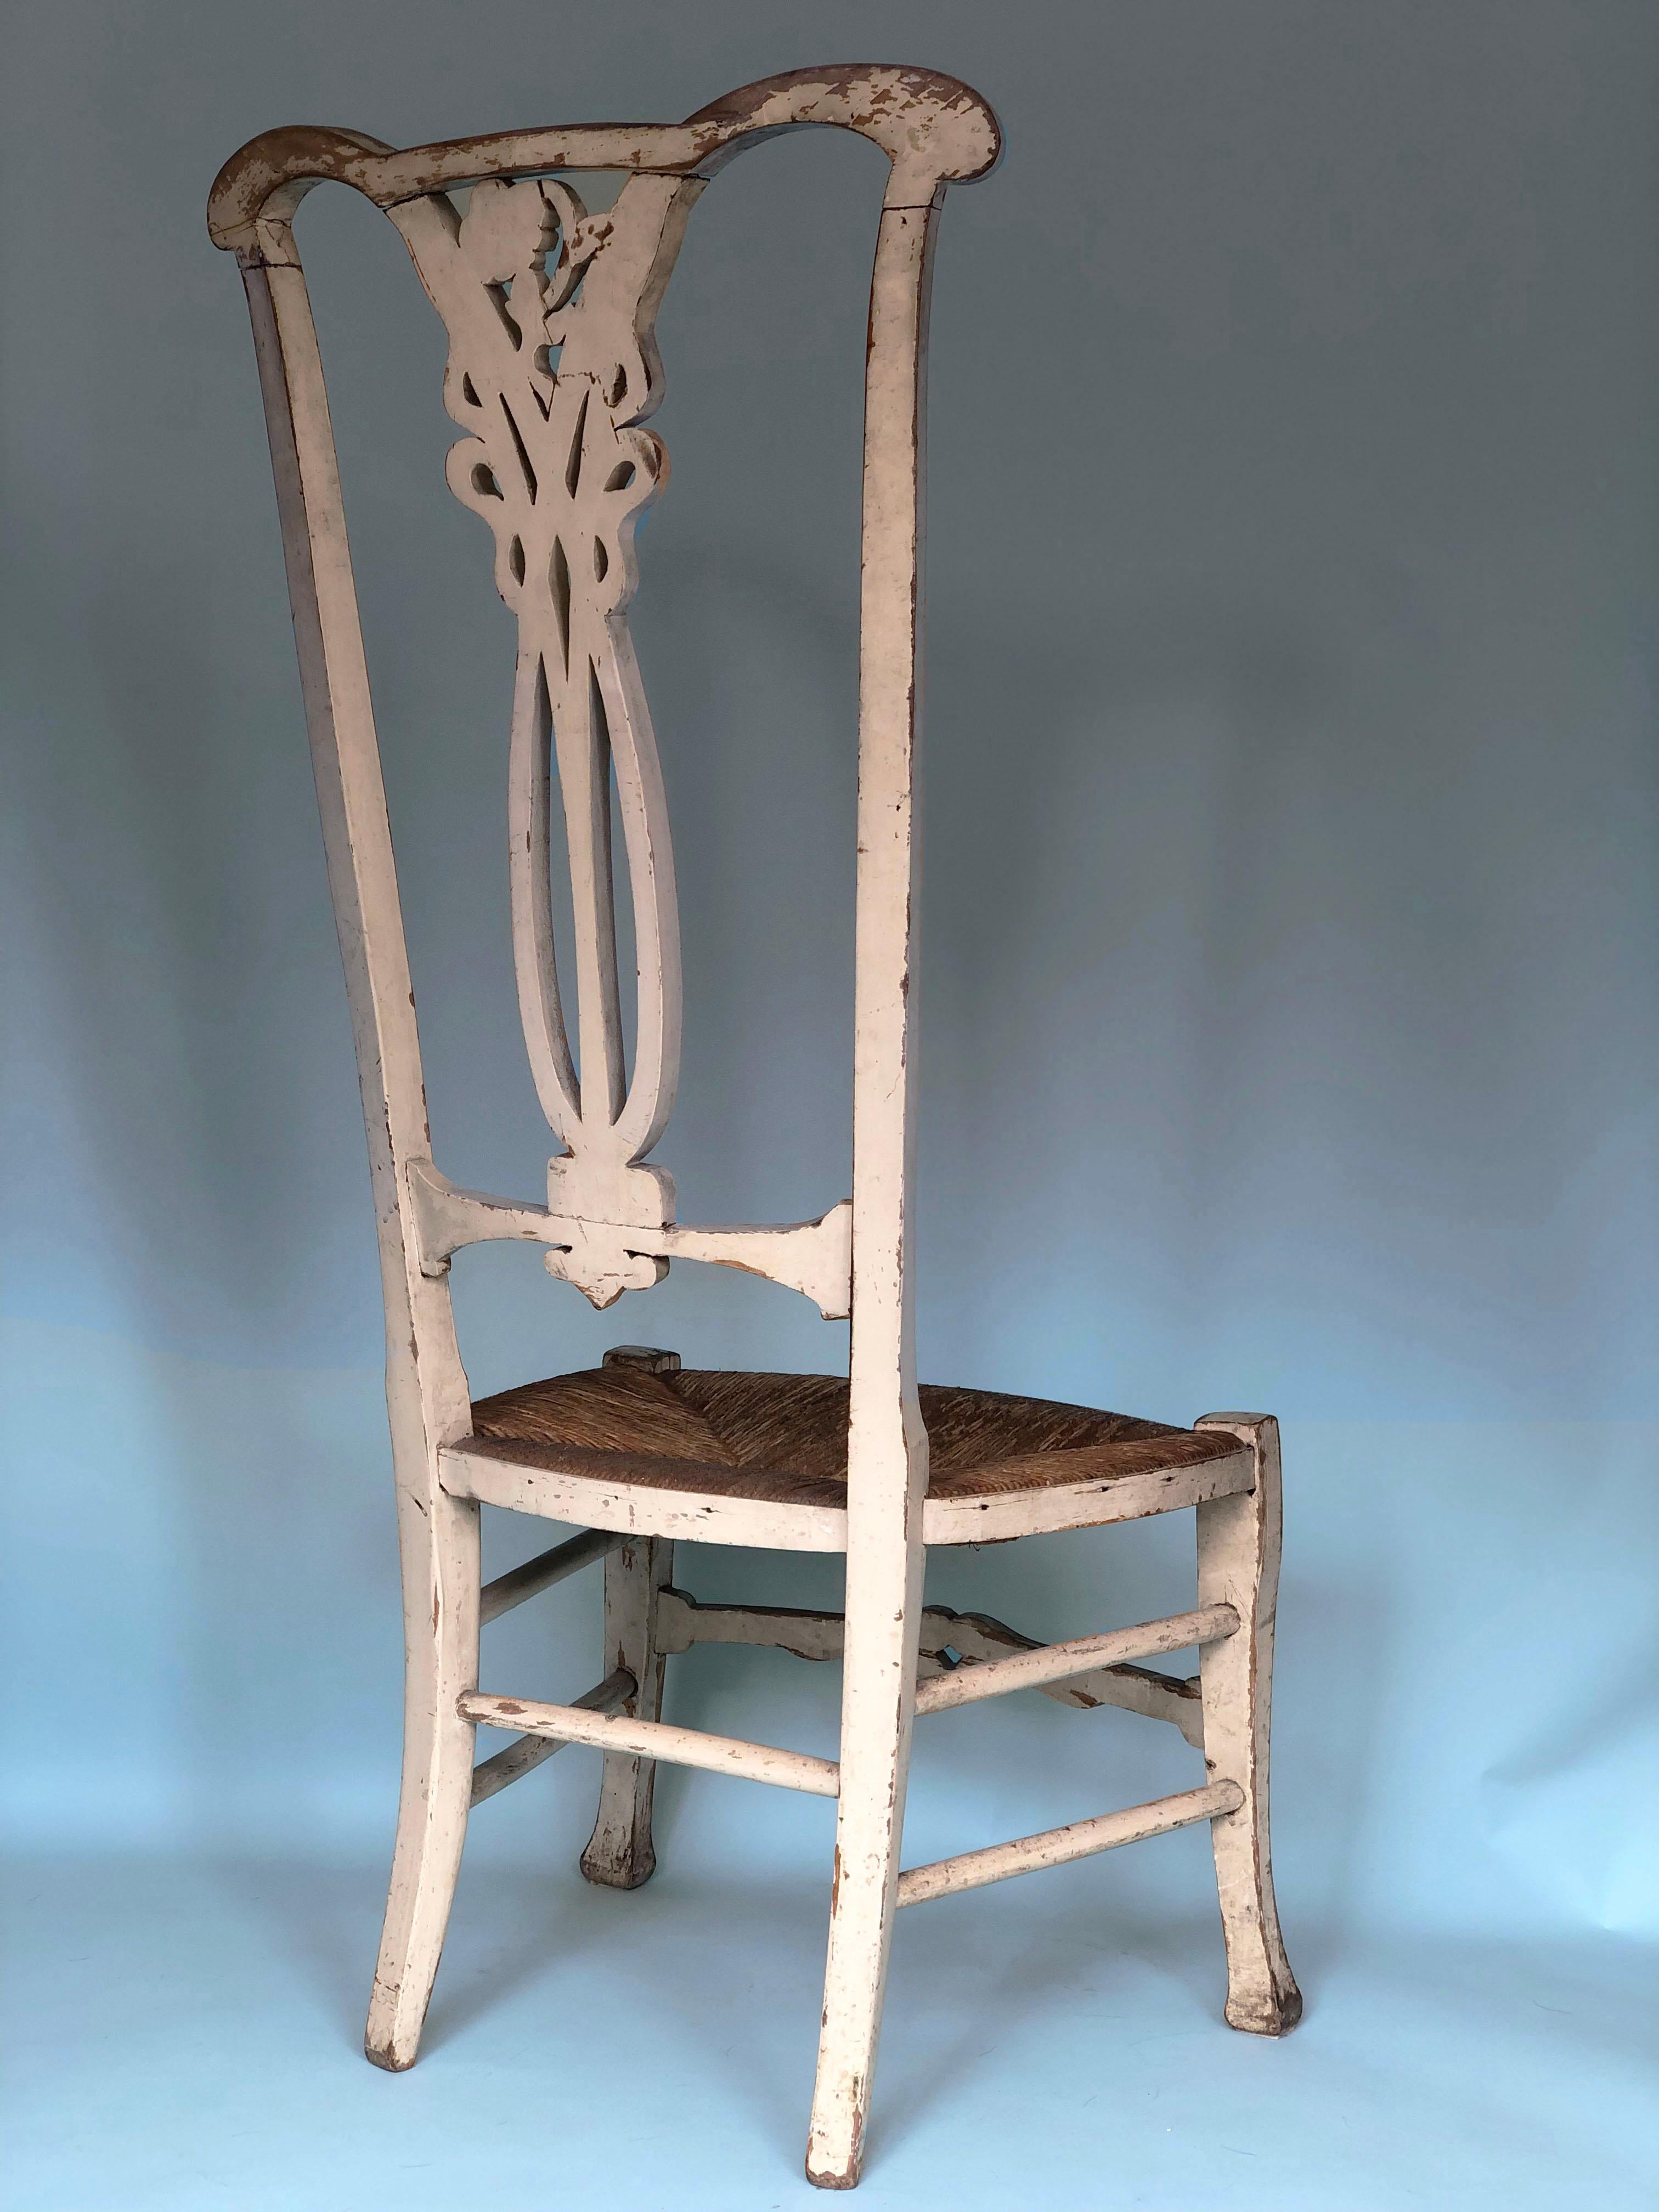 A cream painted high back chair from the Jugendstil period, Germany. The beautifully weathered chair with a carved back with a rush seat is in good condition.

Object: Chair
Design: Unknown
Style: Antique, Jugendstil
Period: 1890-1910
Country of